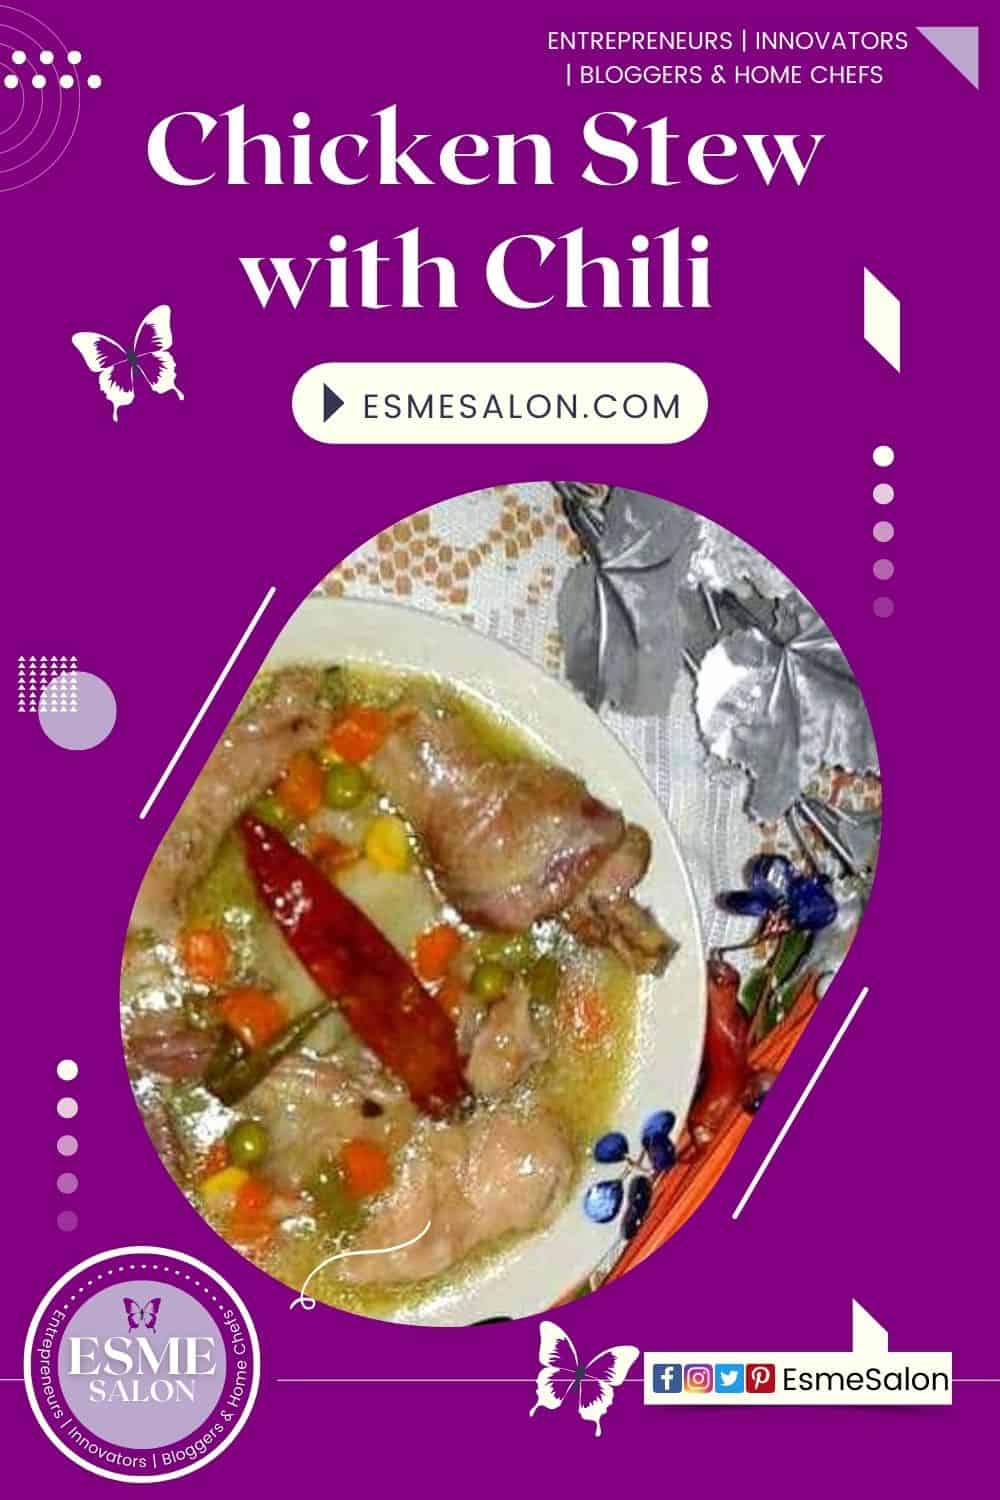 an image of Chicken Stew with Vegetables and Chili plated for serving with a red chili for flavor and decoration